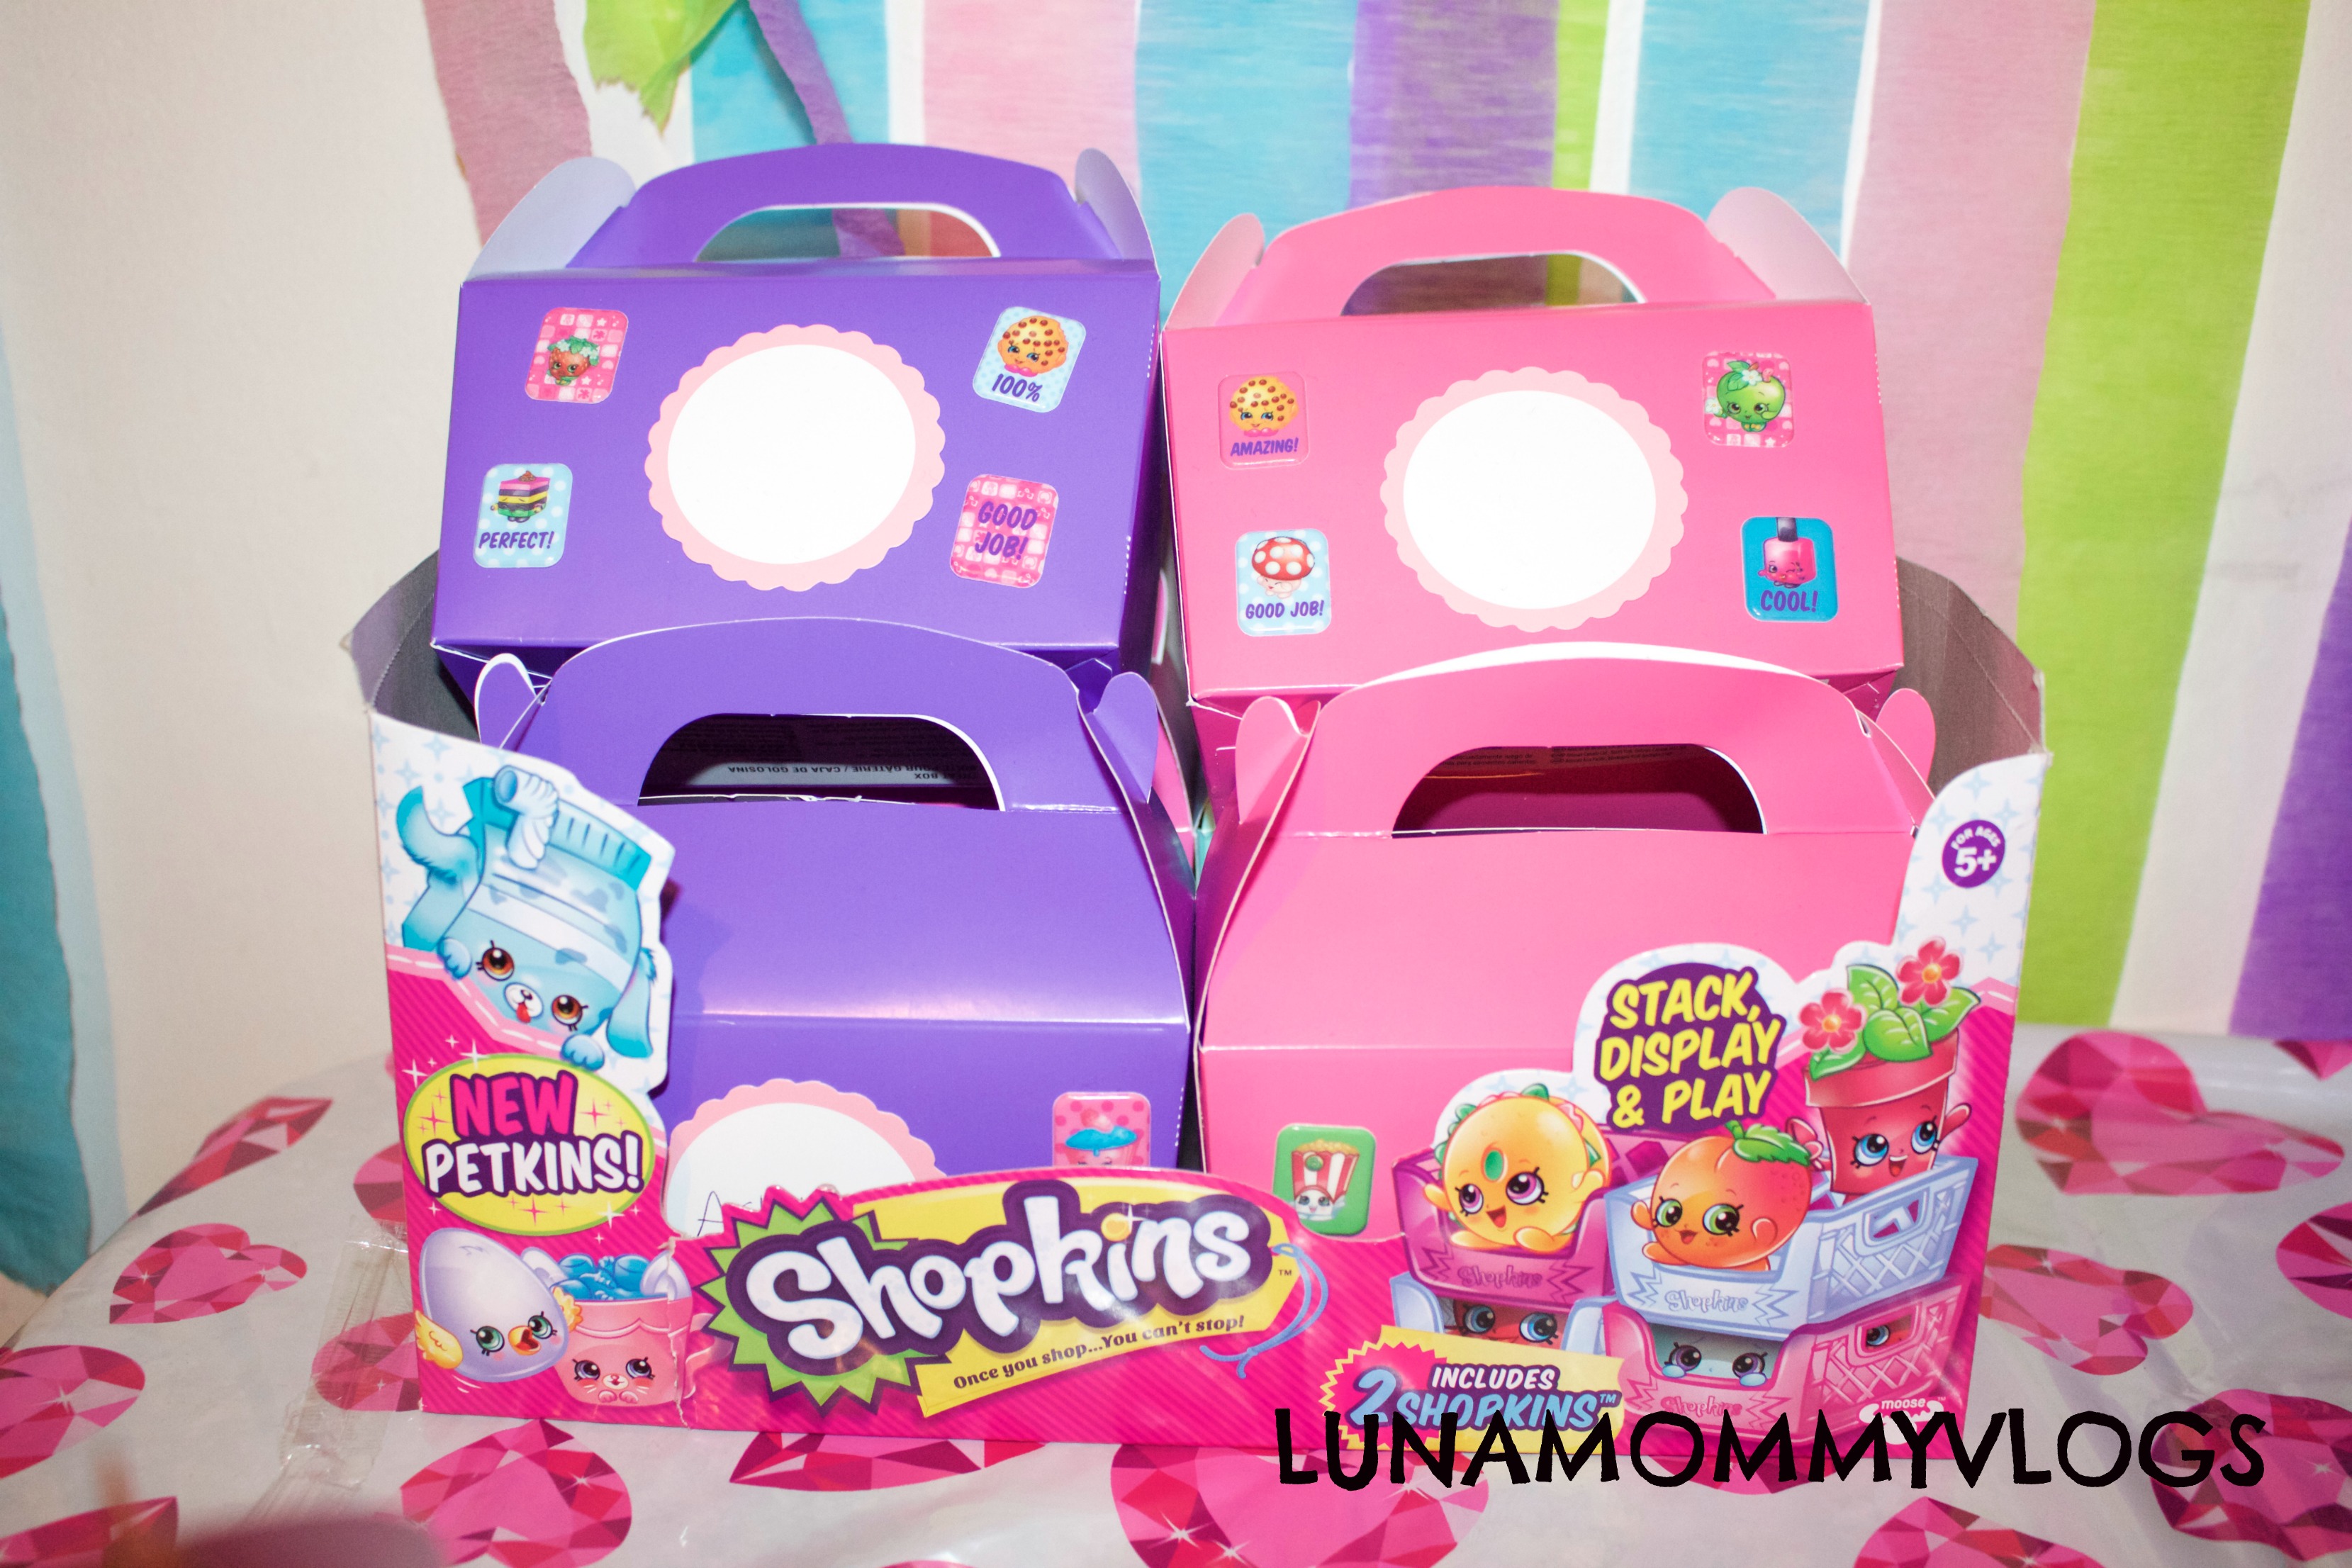 Shopkins Themed Party - HD Wallpaper 